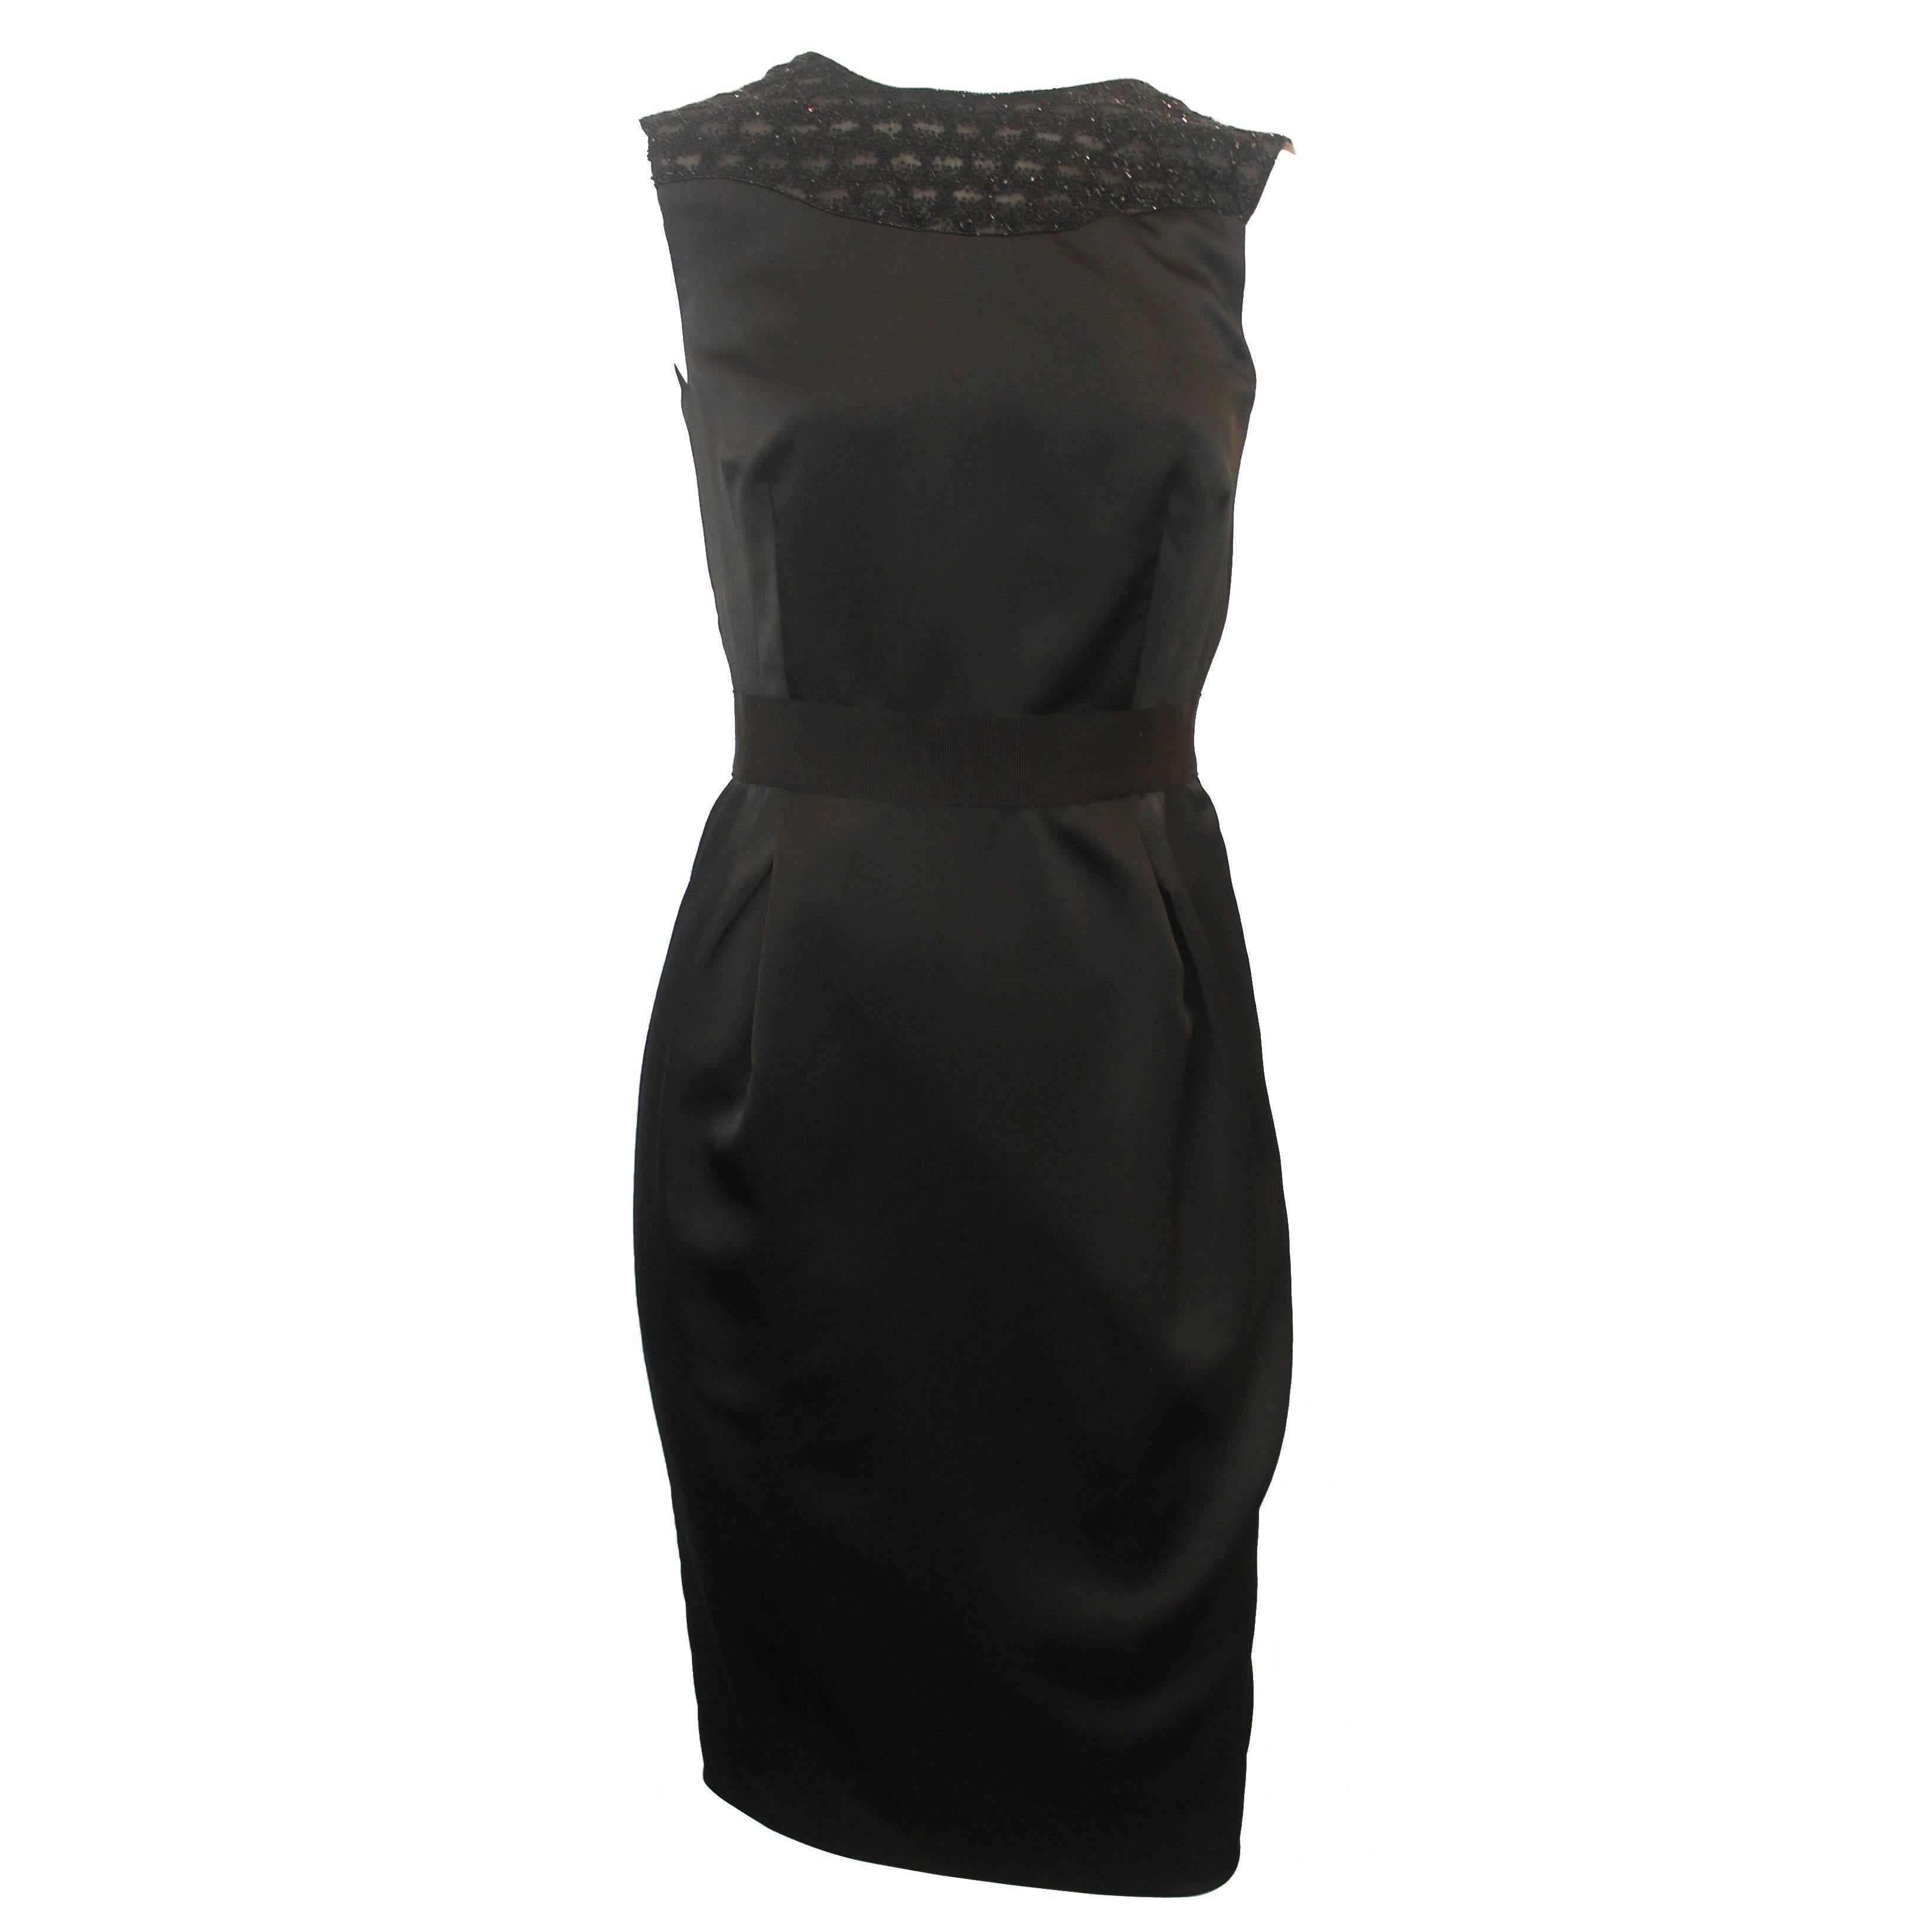 Valentino Black Sleeveless Tapered Dress with Beading Silk Dress - S For Sale